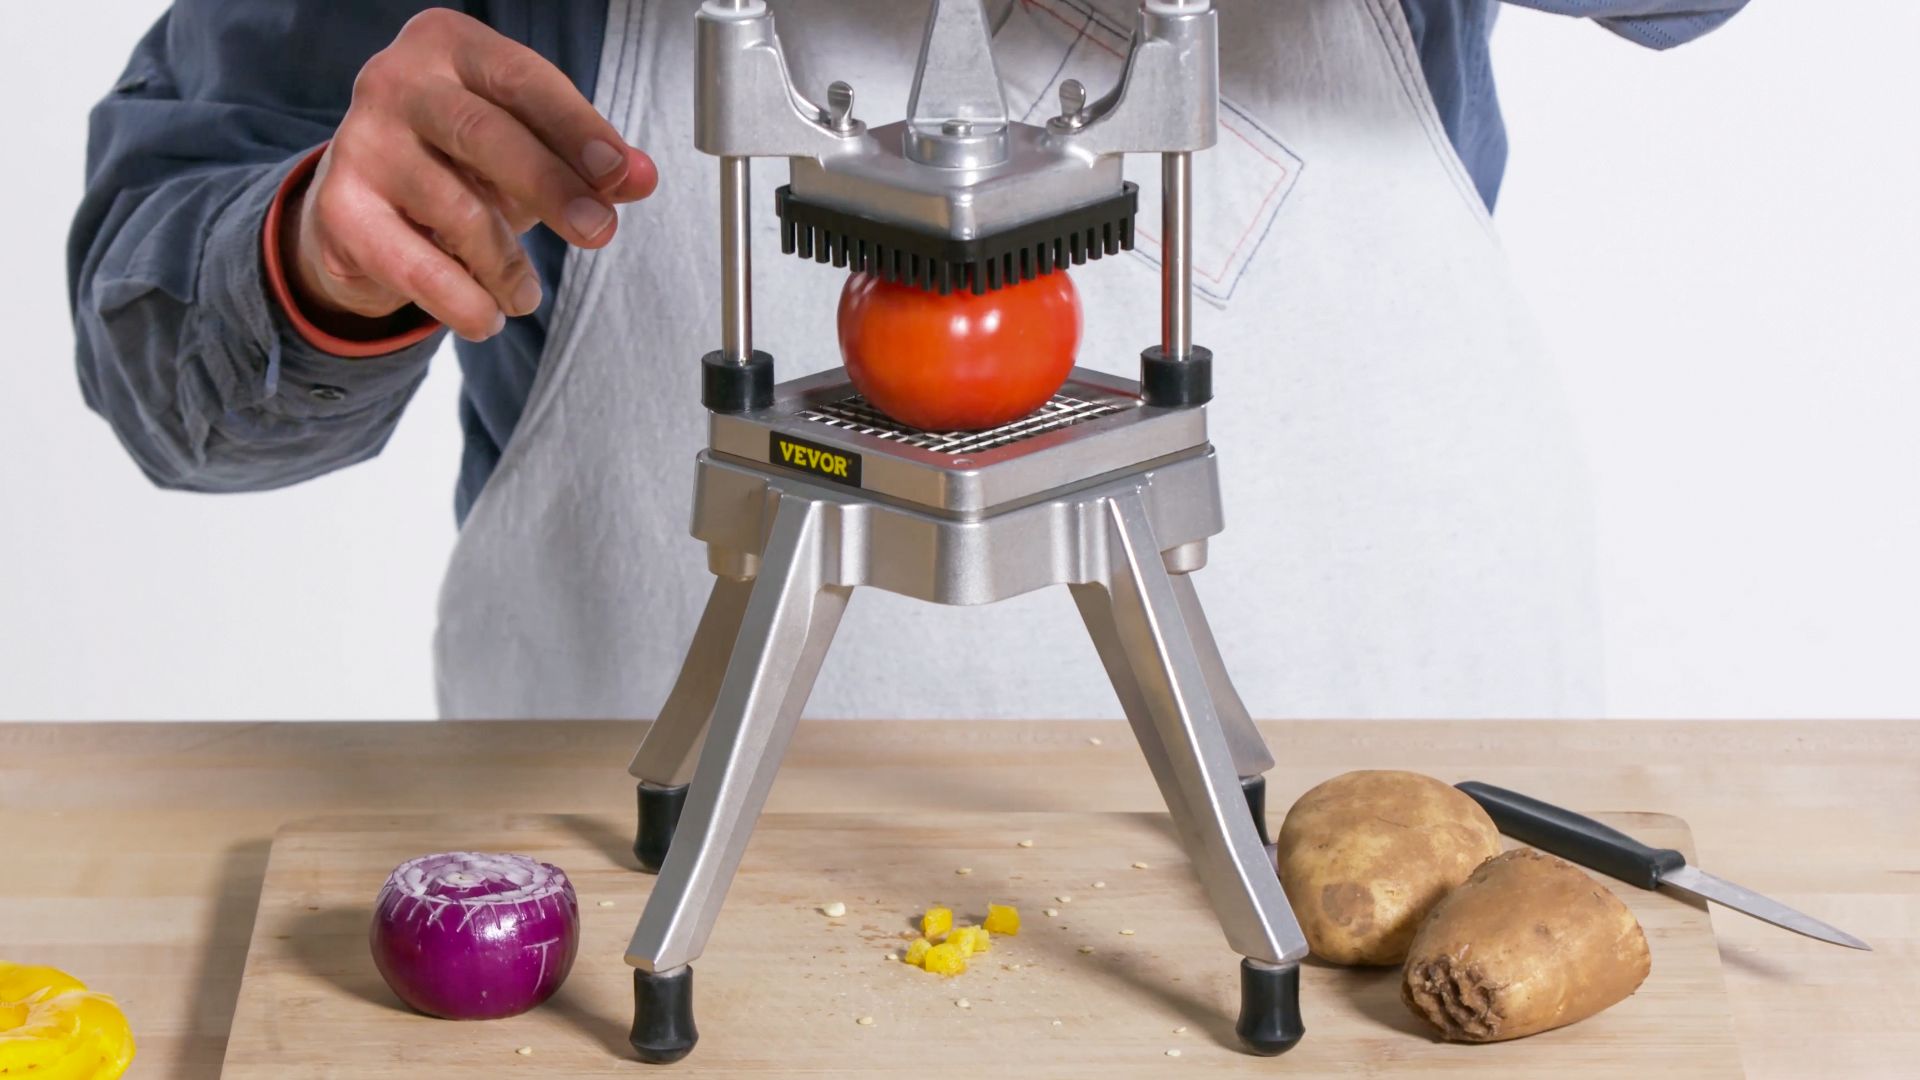 10 Best Vegetable Cutters for 2022 - Gadgets and Choppers for Cutting  Veggies